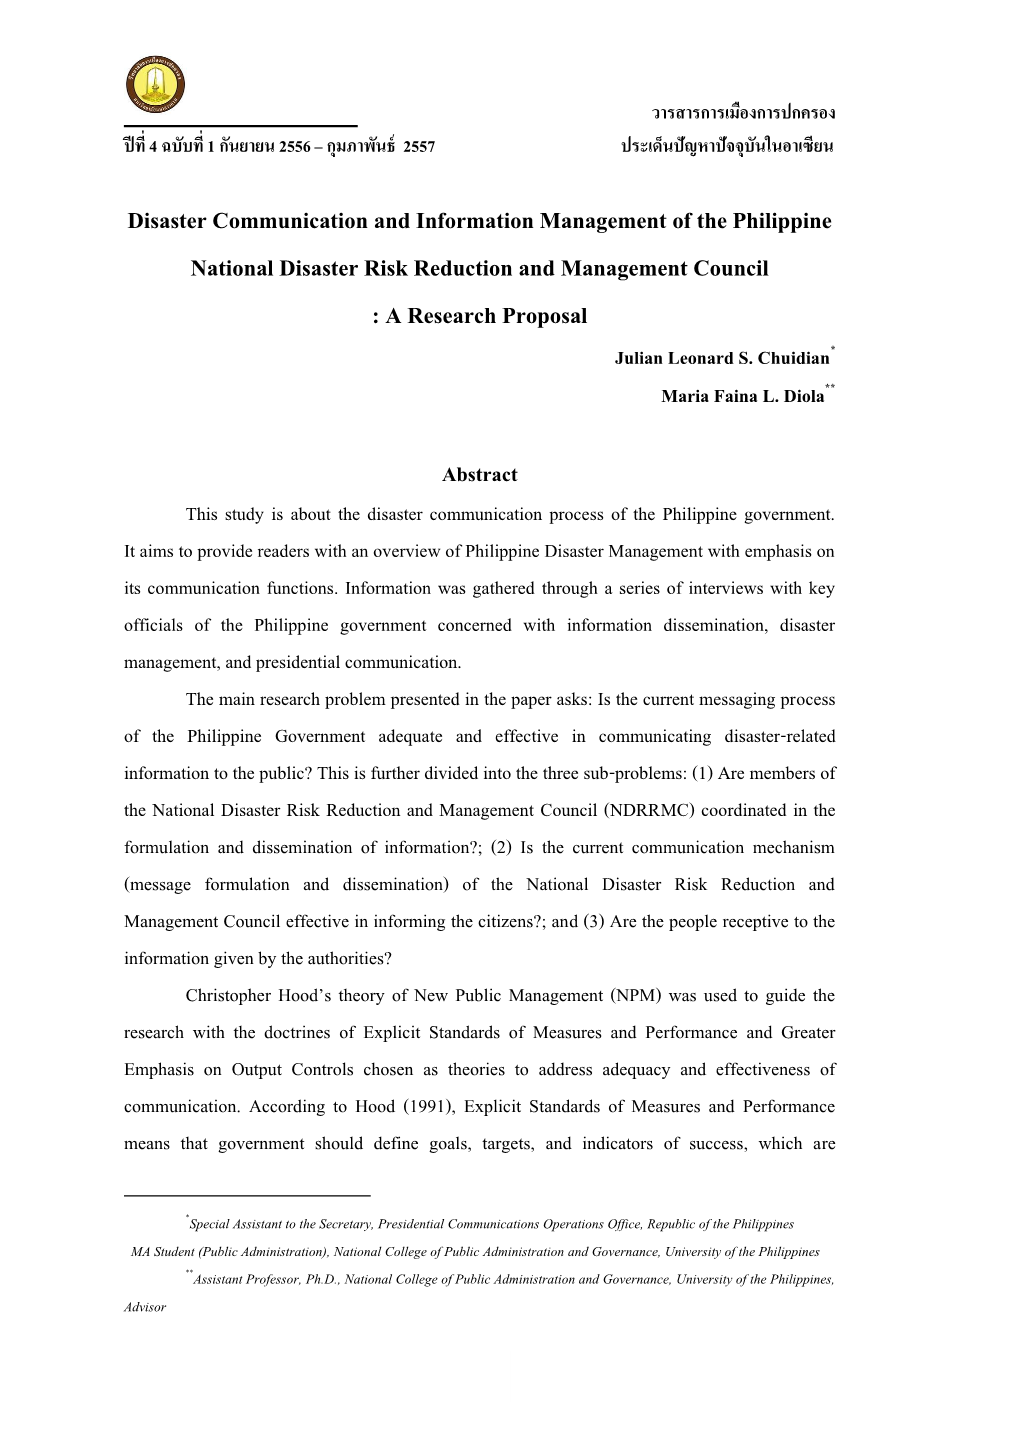 disaster management research proposal